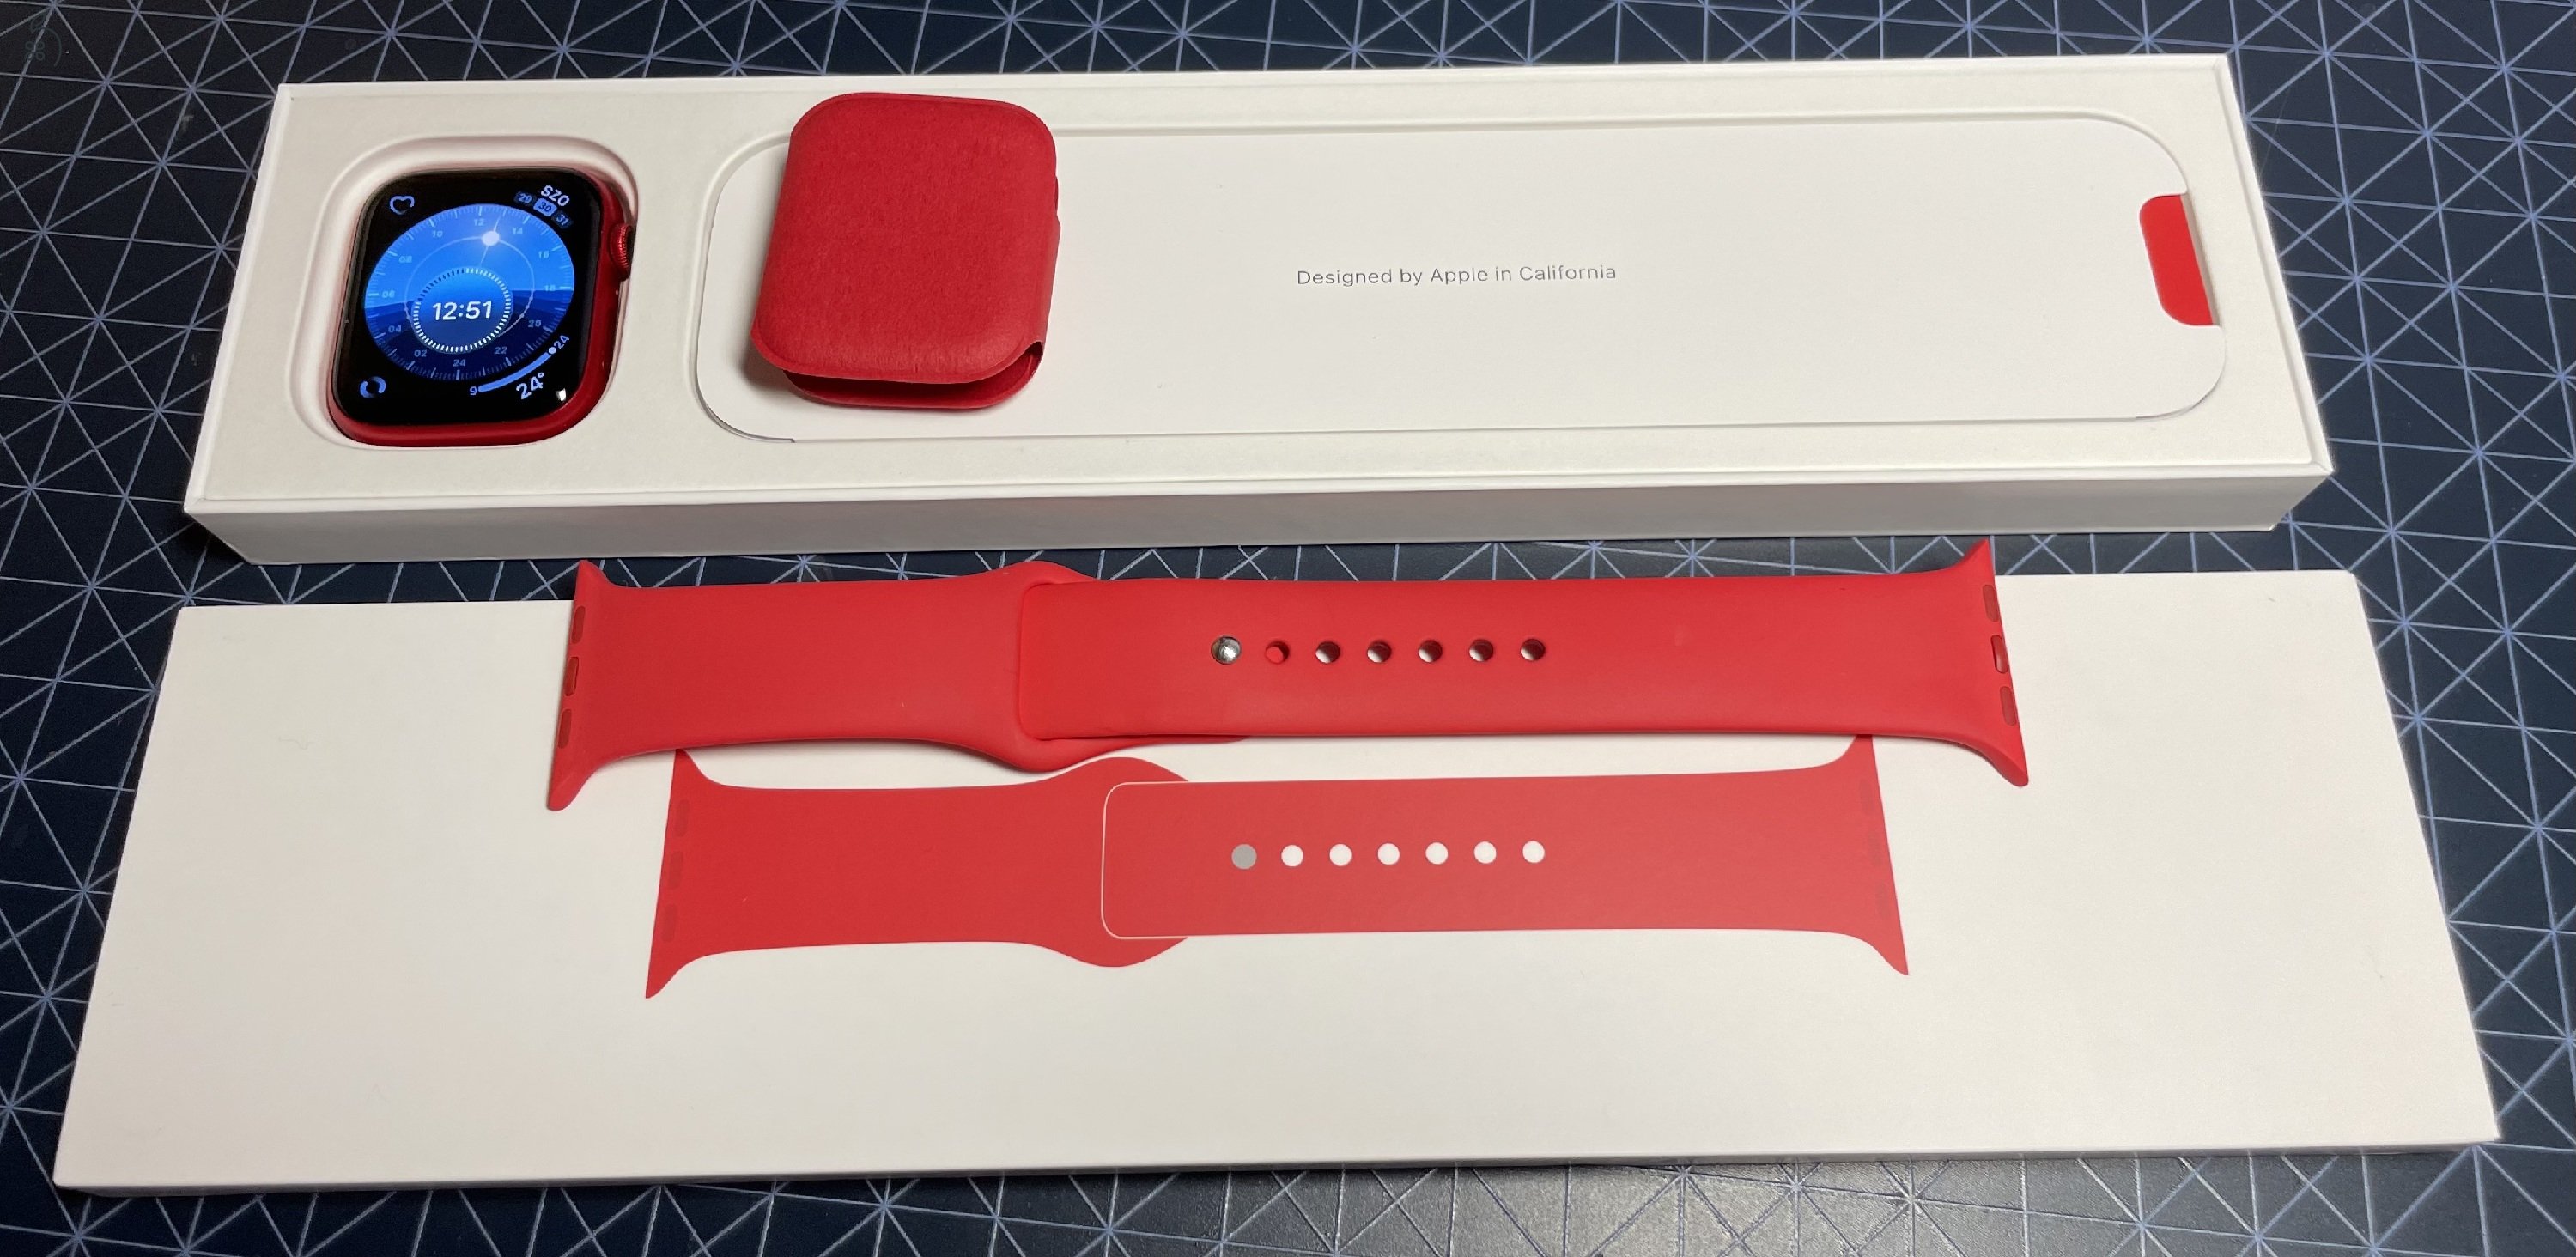 Apple Watch Series 8 45mm ProductRed GPS+Cellular